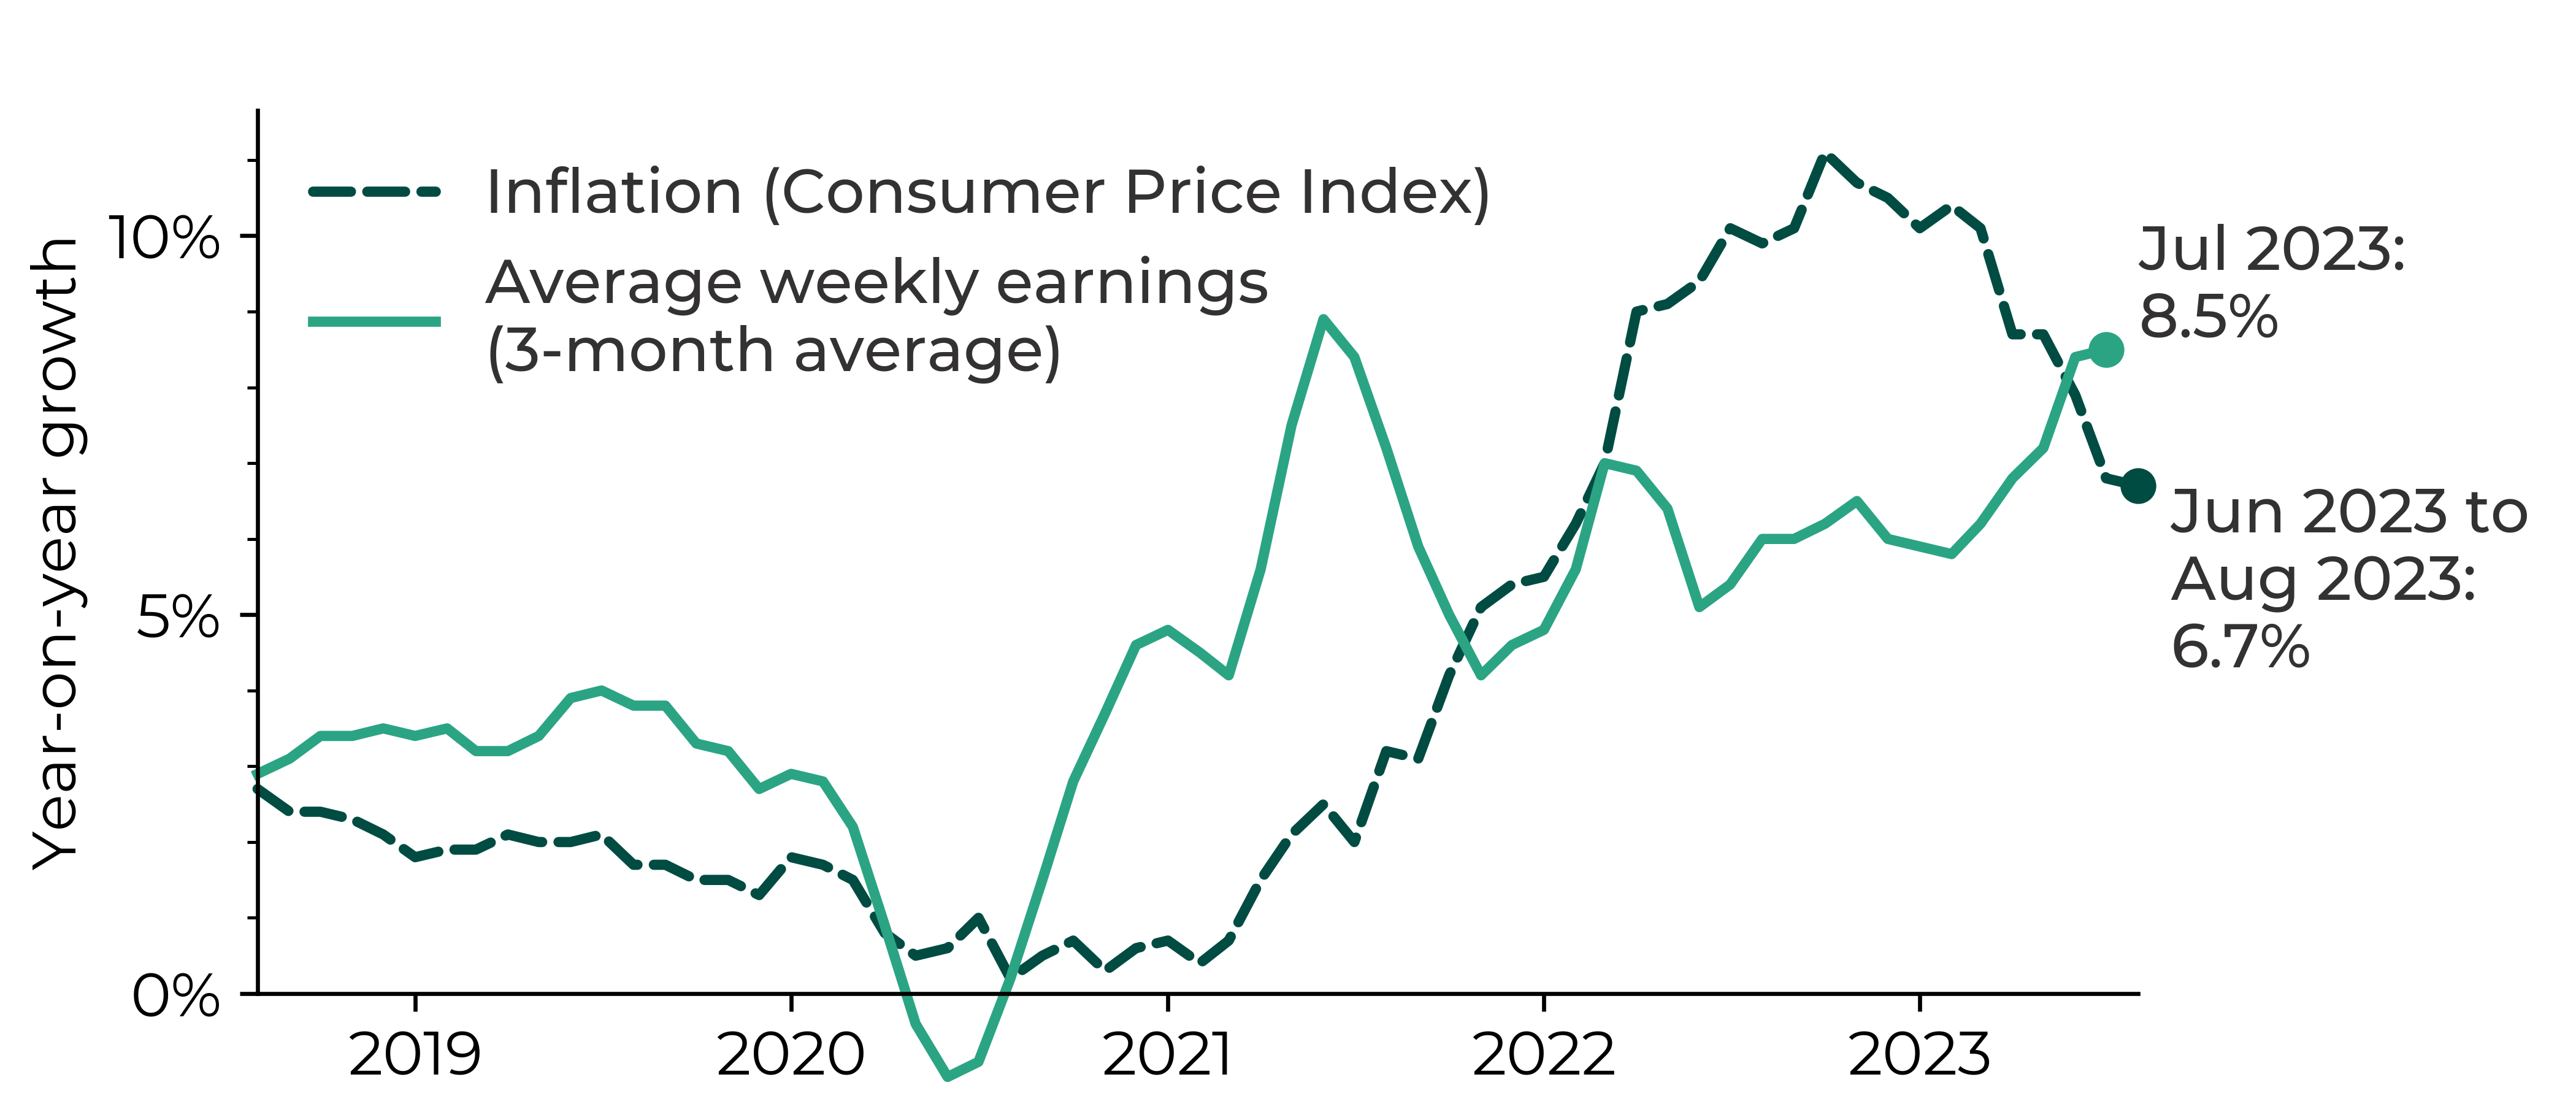 Graph showing UK inflation exceeding average weekly earnings (3-month average) in 2022-23. In July 2023, the average weekly earnings were 8.5% higher than for July 2022 whereas the Consumer Price Index inflation was at 6.7% in June to August 2023.